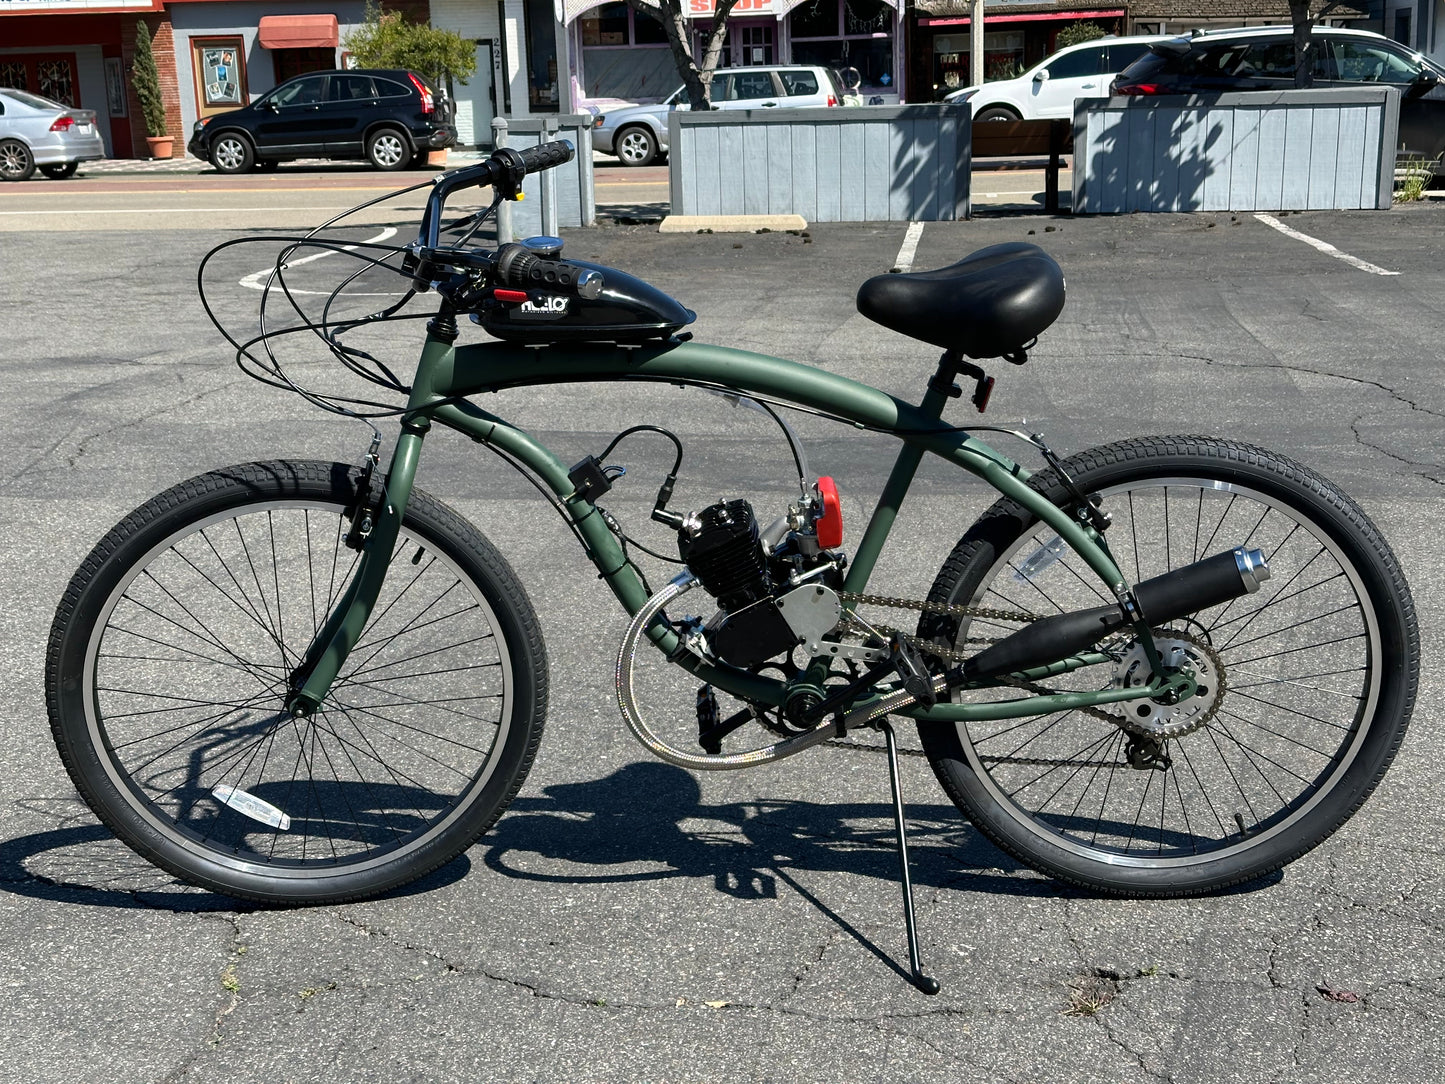 Available Now Army Green ECO 2 Stroke Motorized Bicycle